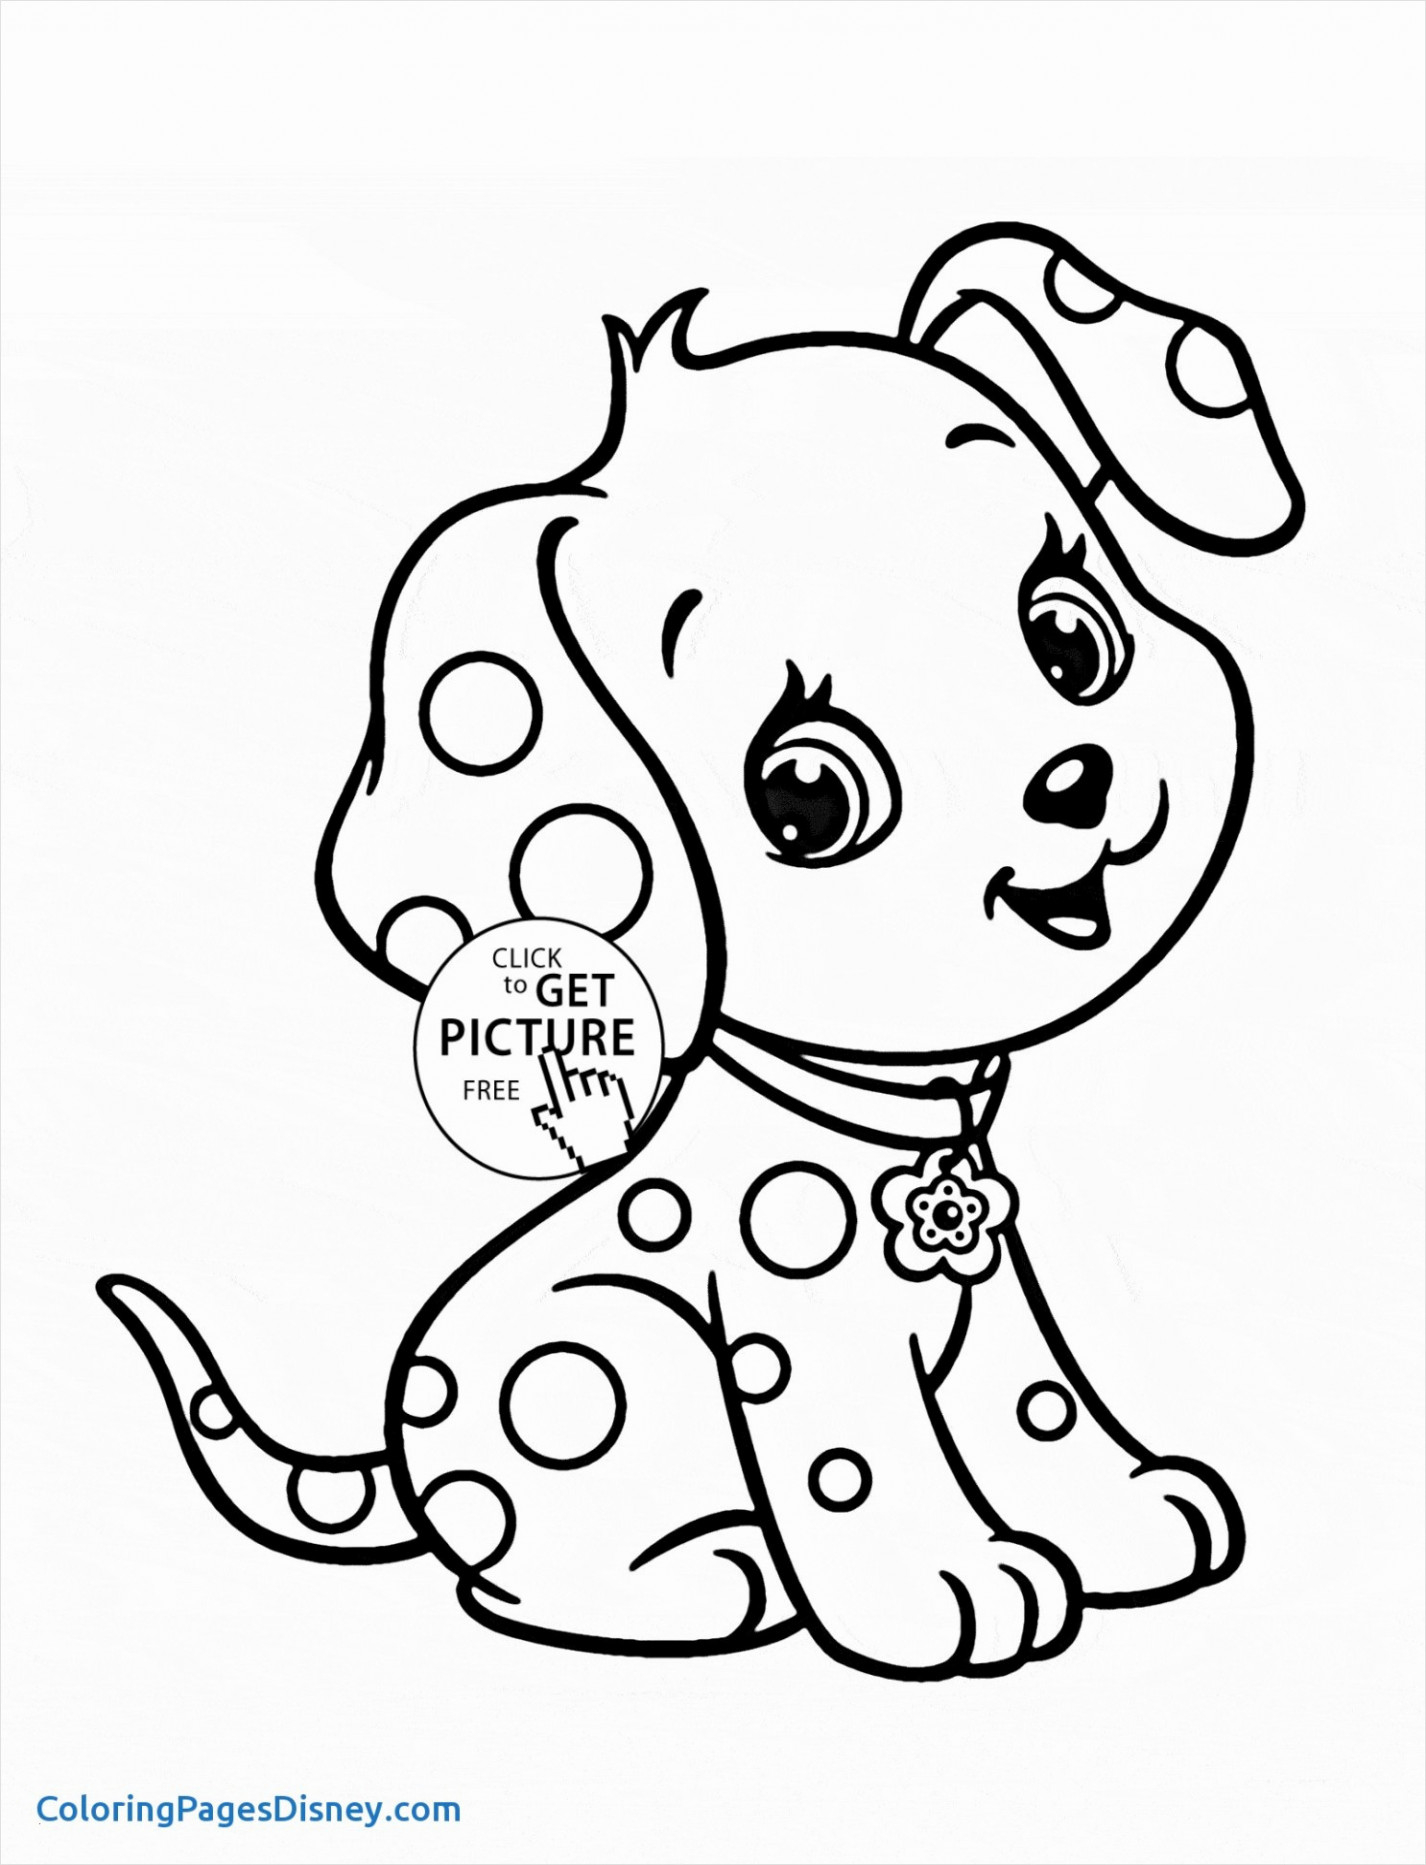 Free Rabbit Coloring Pages Coloring Book Bunny Free Bunny Rabbit Coloring Pages Poster Coloring